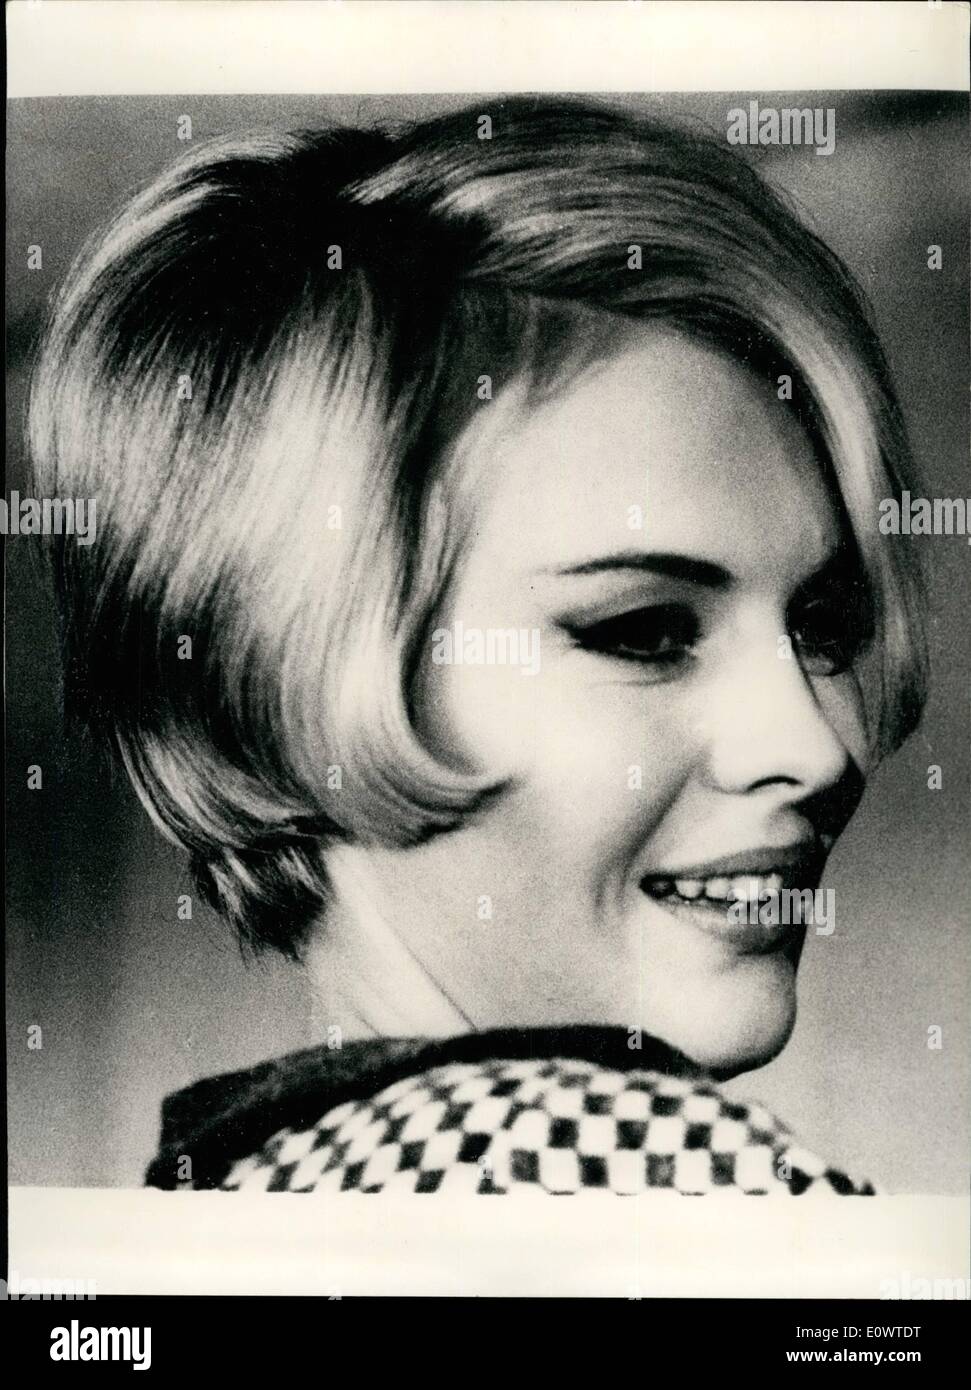 Mar 03 1964 Jean Seberg Teams With Jean Paul Belmondo In Her New Film American Born And France Living Actress Jean Seberg Has Begun Work On The New Film By Jean Becker Free Escape In